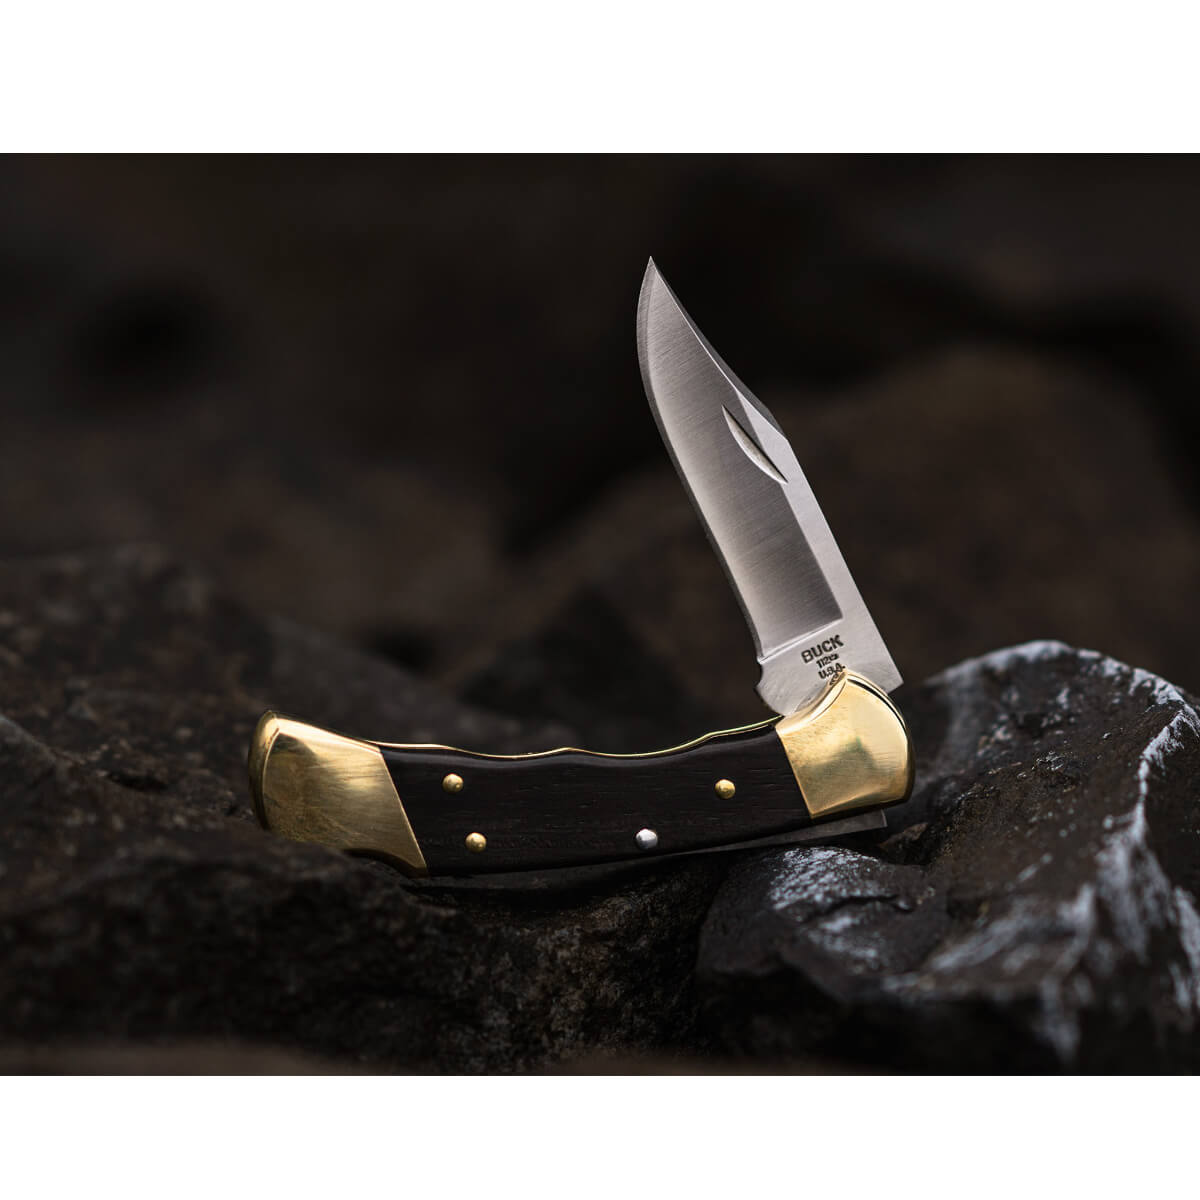 Buck 112 Ranger with Leather Sheath